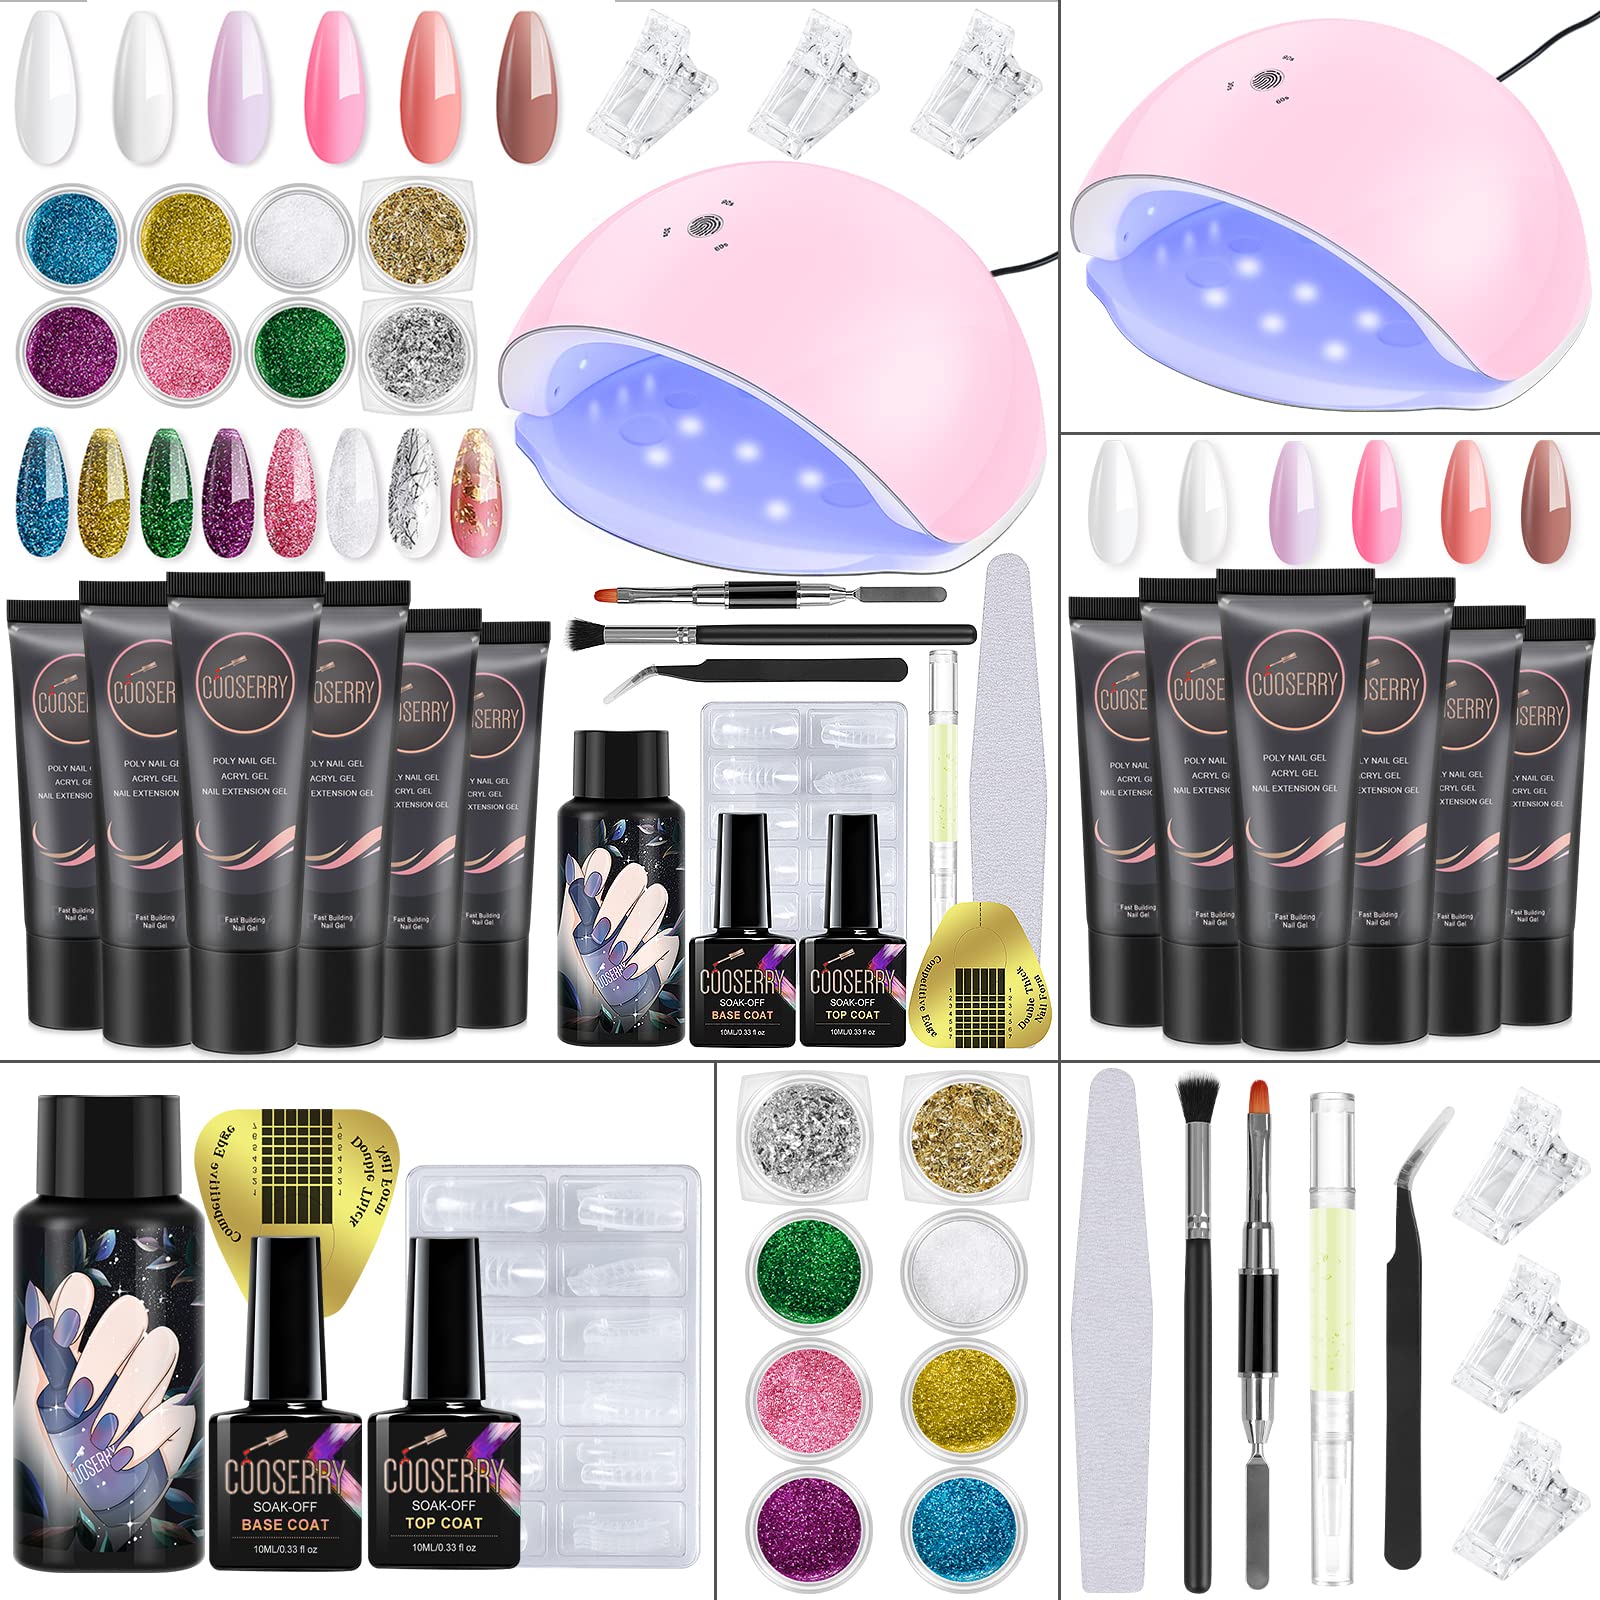 Cooserry Poly Gel Nail Kit With Lamp, 6 Colors Builder Gel ...